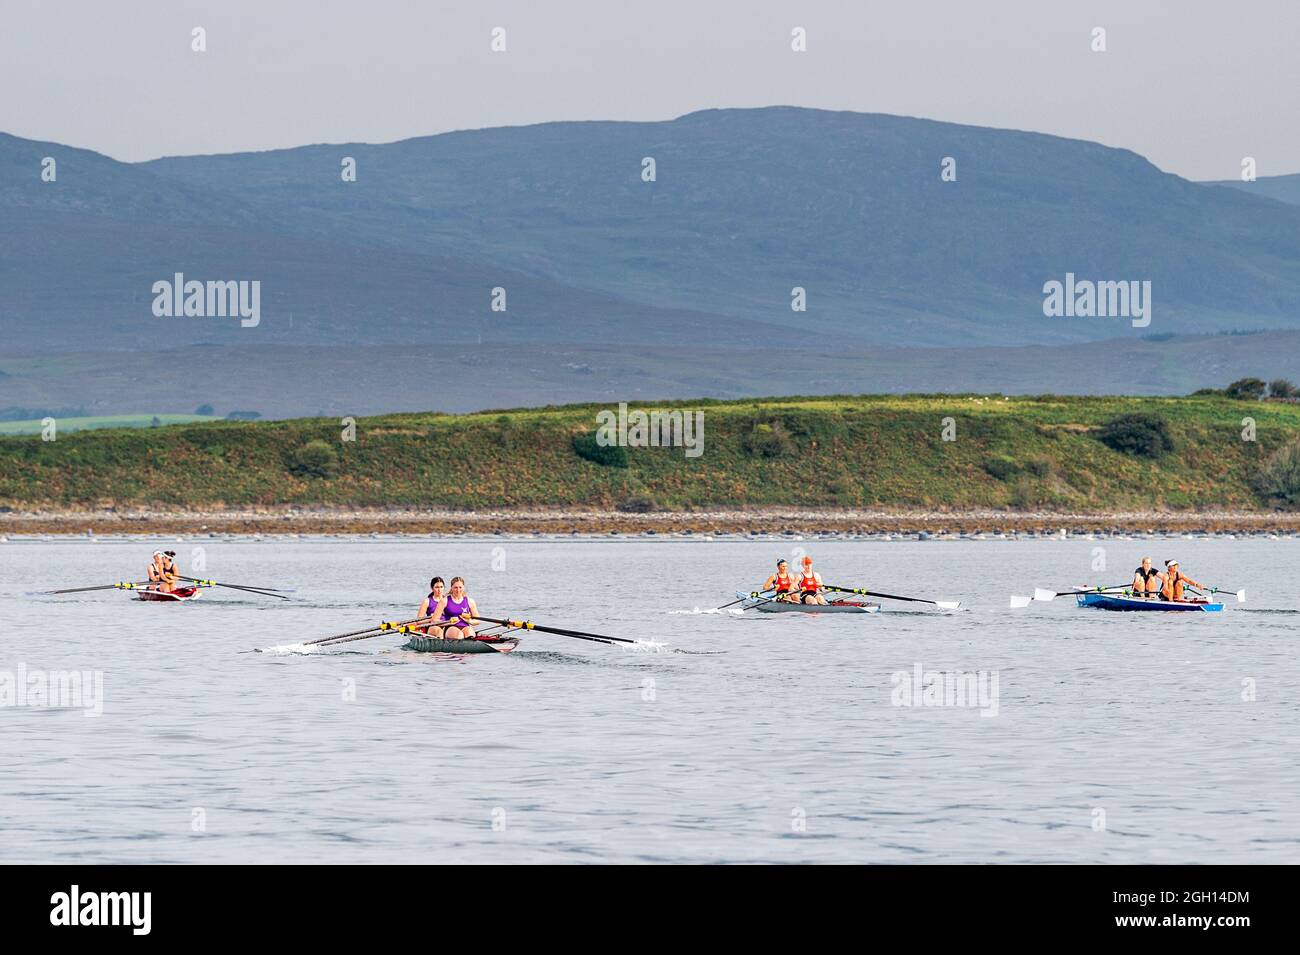 Bantry, West Cork, Ireland. 4th Sep, 2021. Rowing Ireland is holding the national offshore rowing championships in Bantry this weekend. The event, hosted by Bantry Rowing Club, is being contested by 30 rowing clubs from around Ireland. The racing was very close. Credit: AG News/Alamy Live News Stock Photo